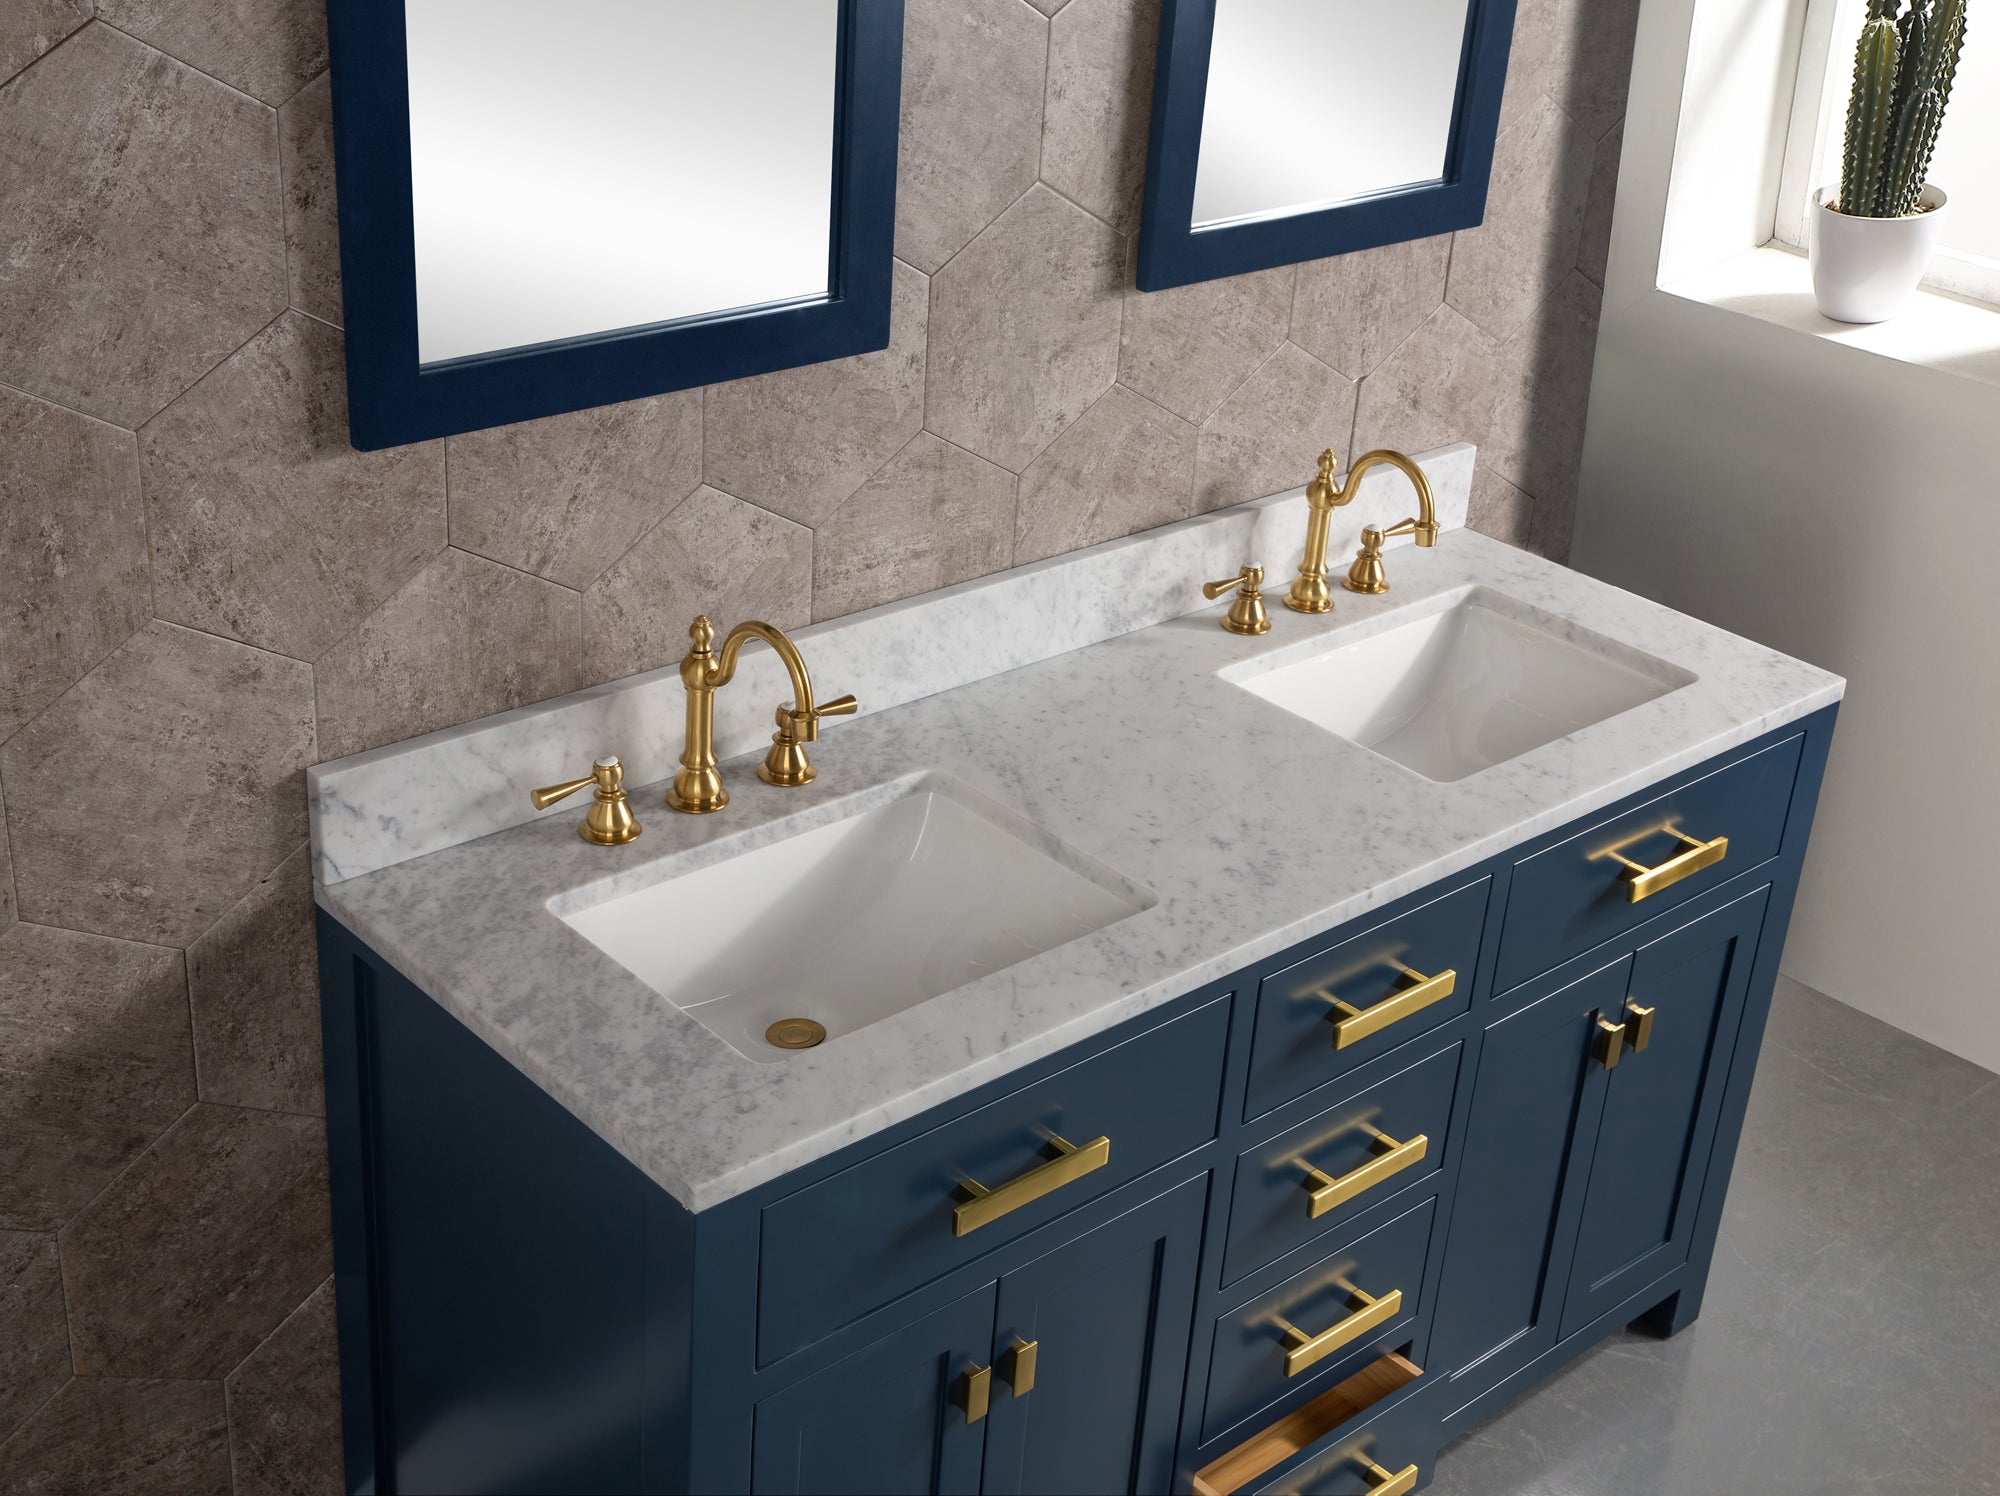 Water Creation | Madison 60-Inch Double Sink Carrara White Marble Vanity In Monarch BlueWith Matching Mirror(s) and F2-0012-06-TL Lavatory Faucet(s) | MS60CW06MB-R21TL1206